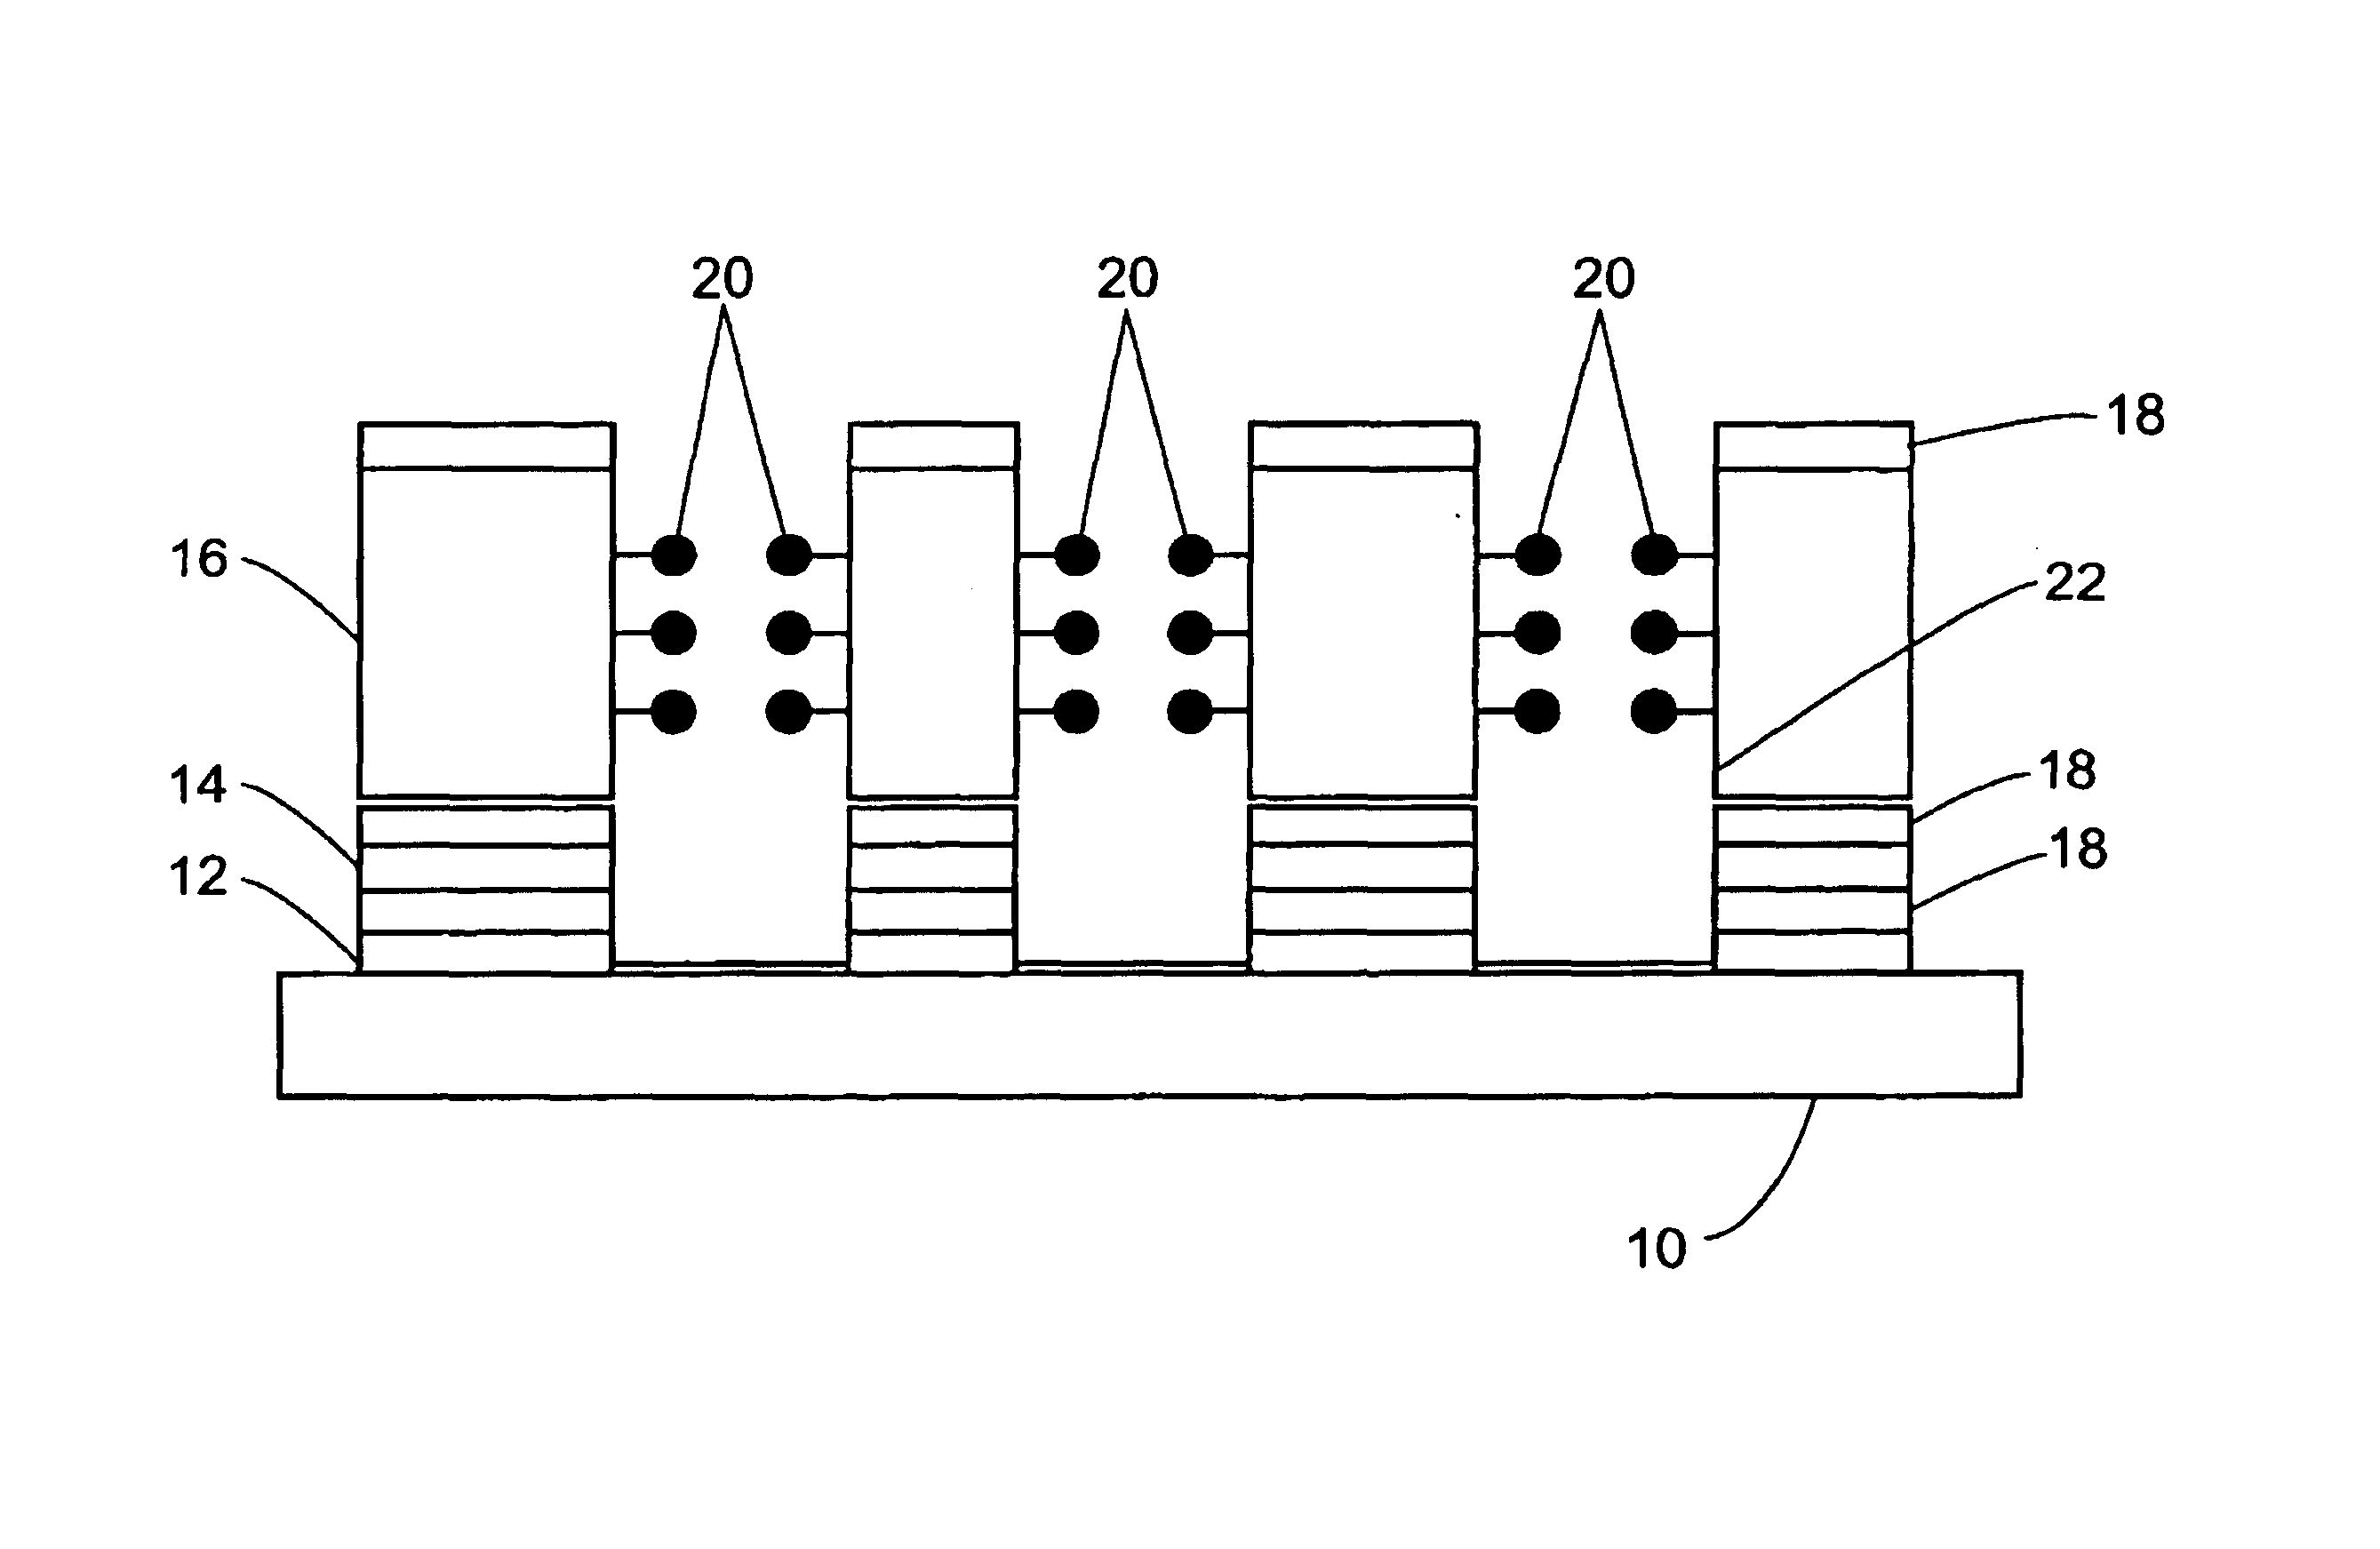 Molehole embedded 3-D crossbar architecture used in electrochemical molecular memory device